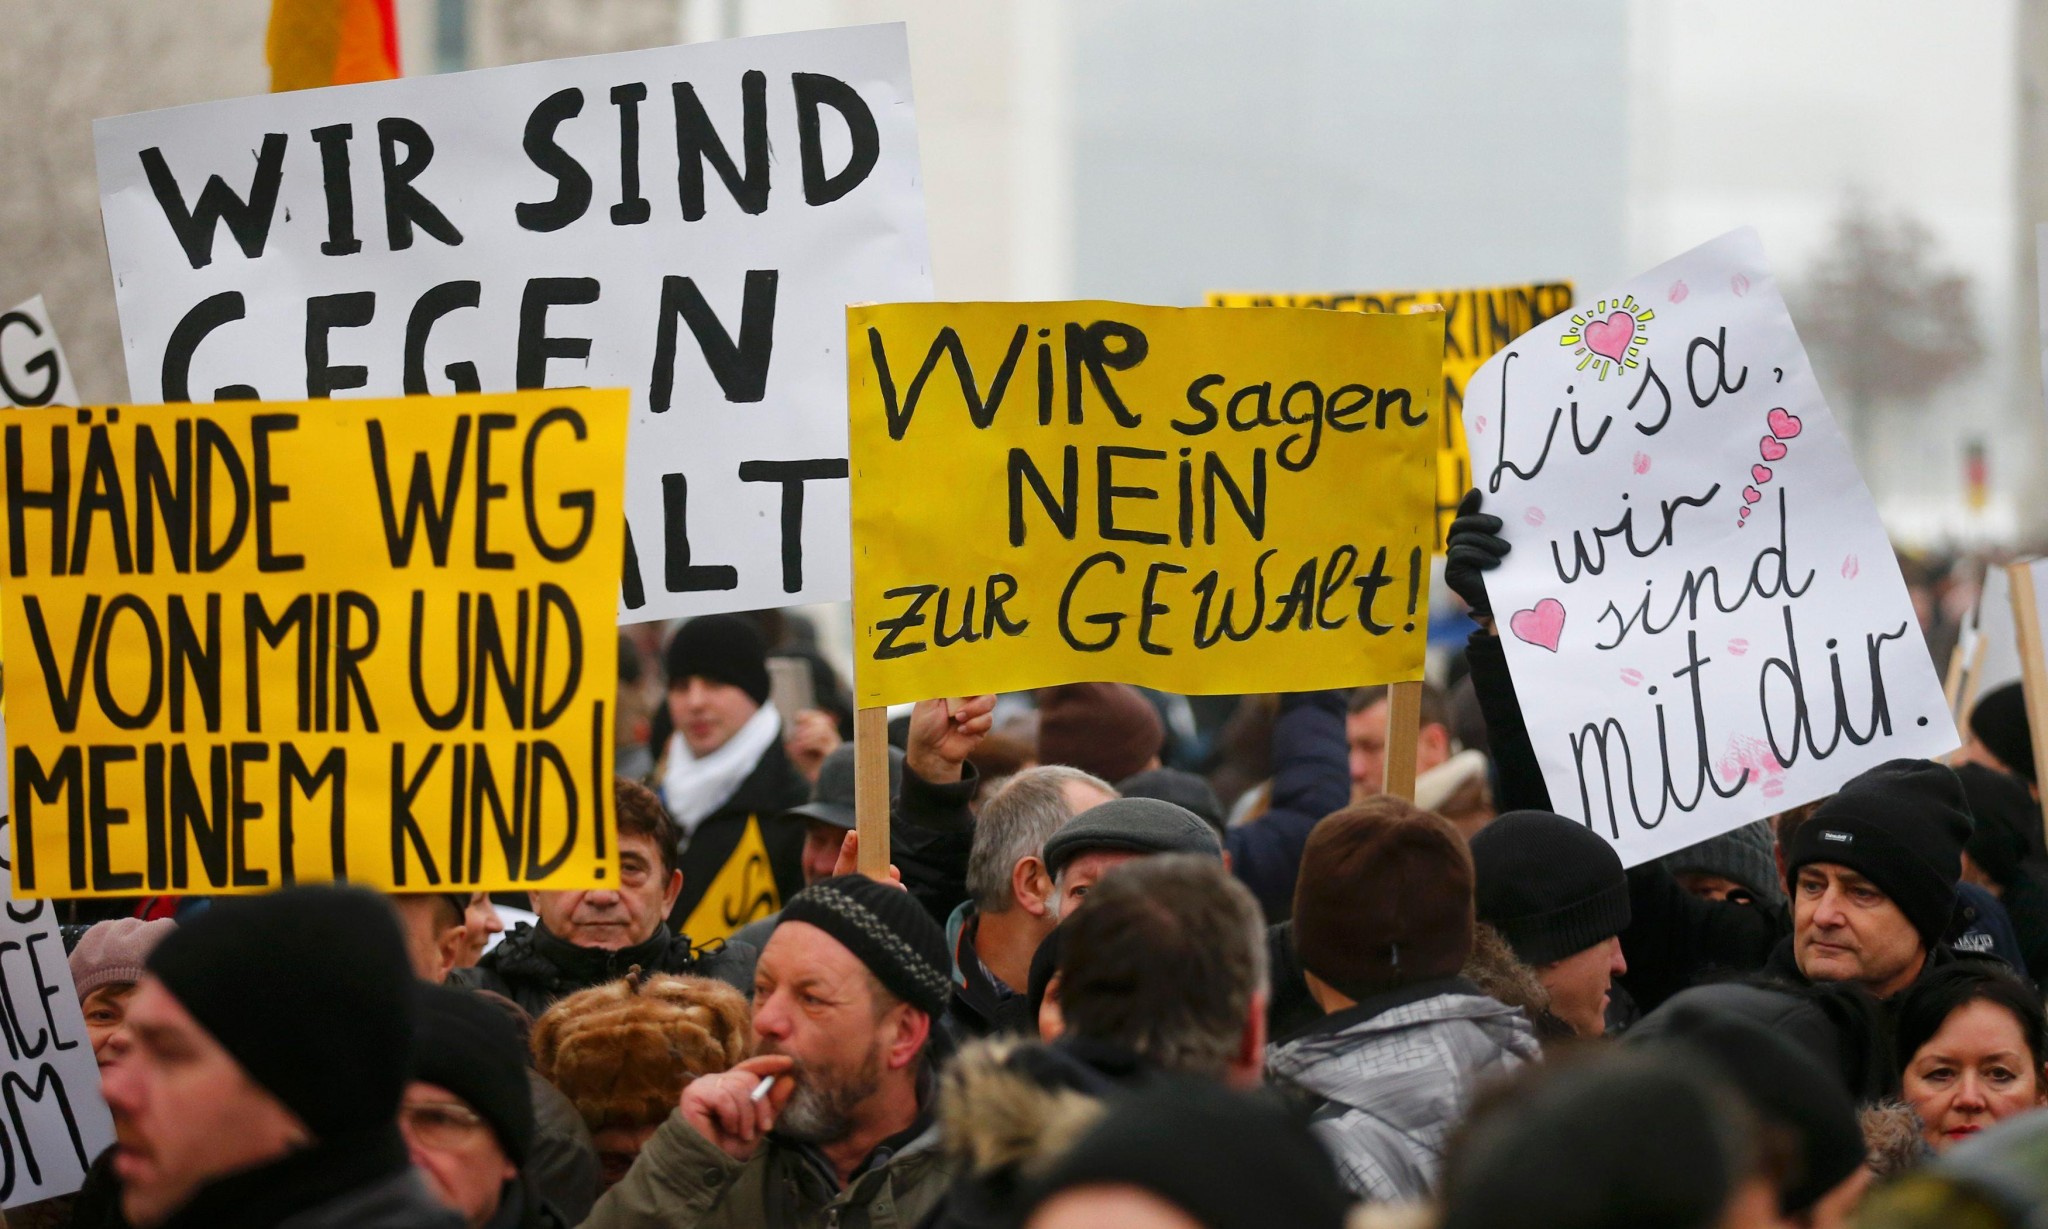 German-Russians protest in Berlin against alleged sexual harassment by migrants. Photograph: Hannibal Hanschke/Reuters